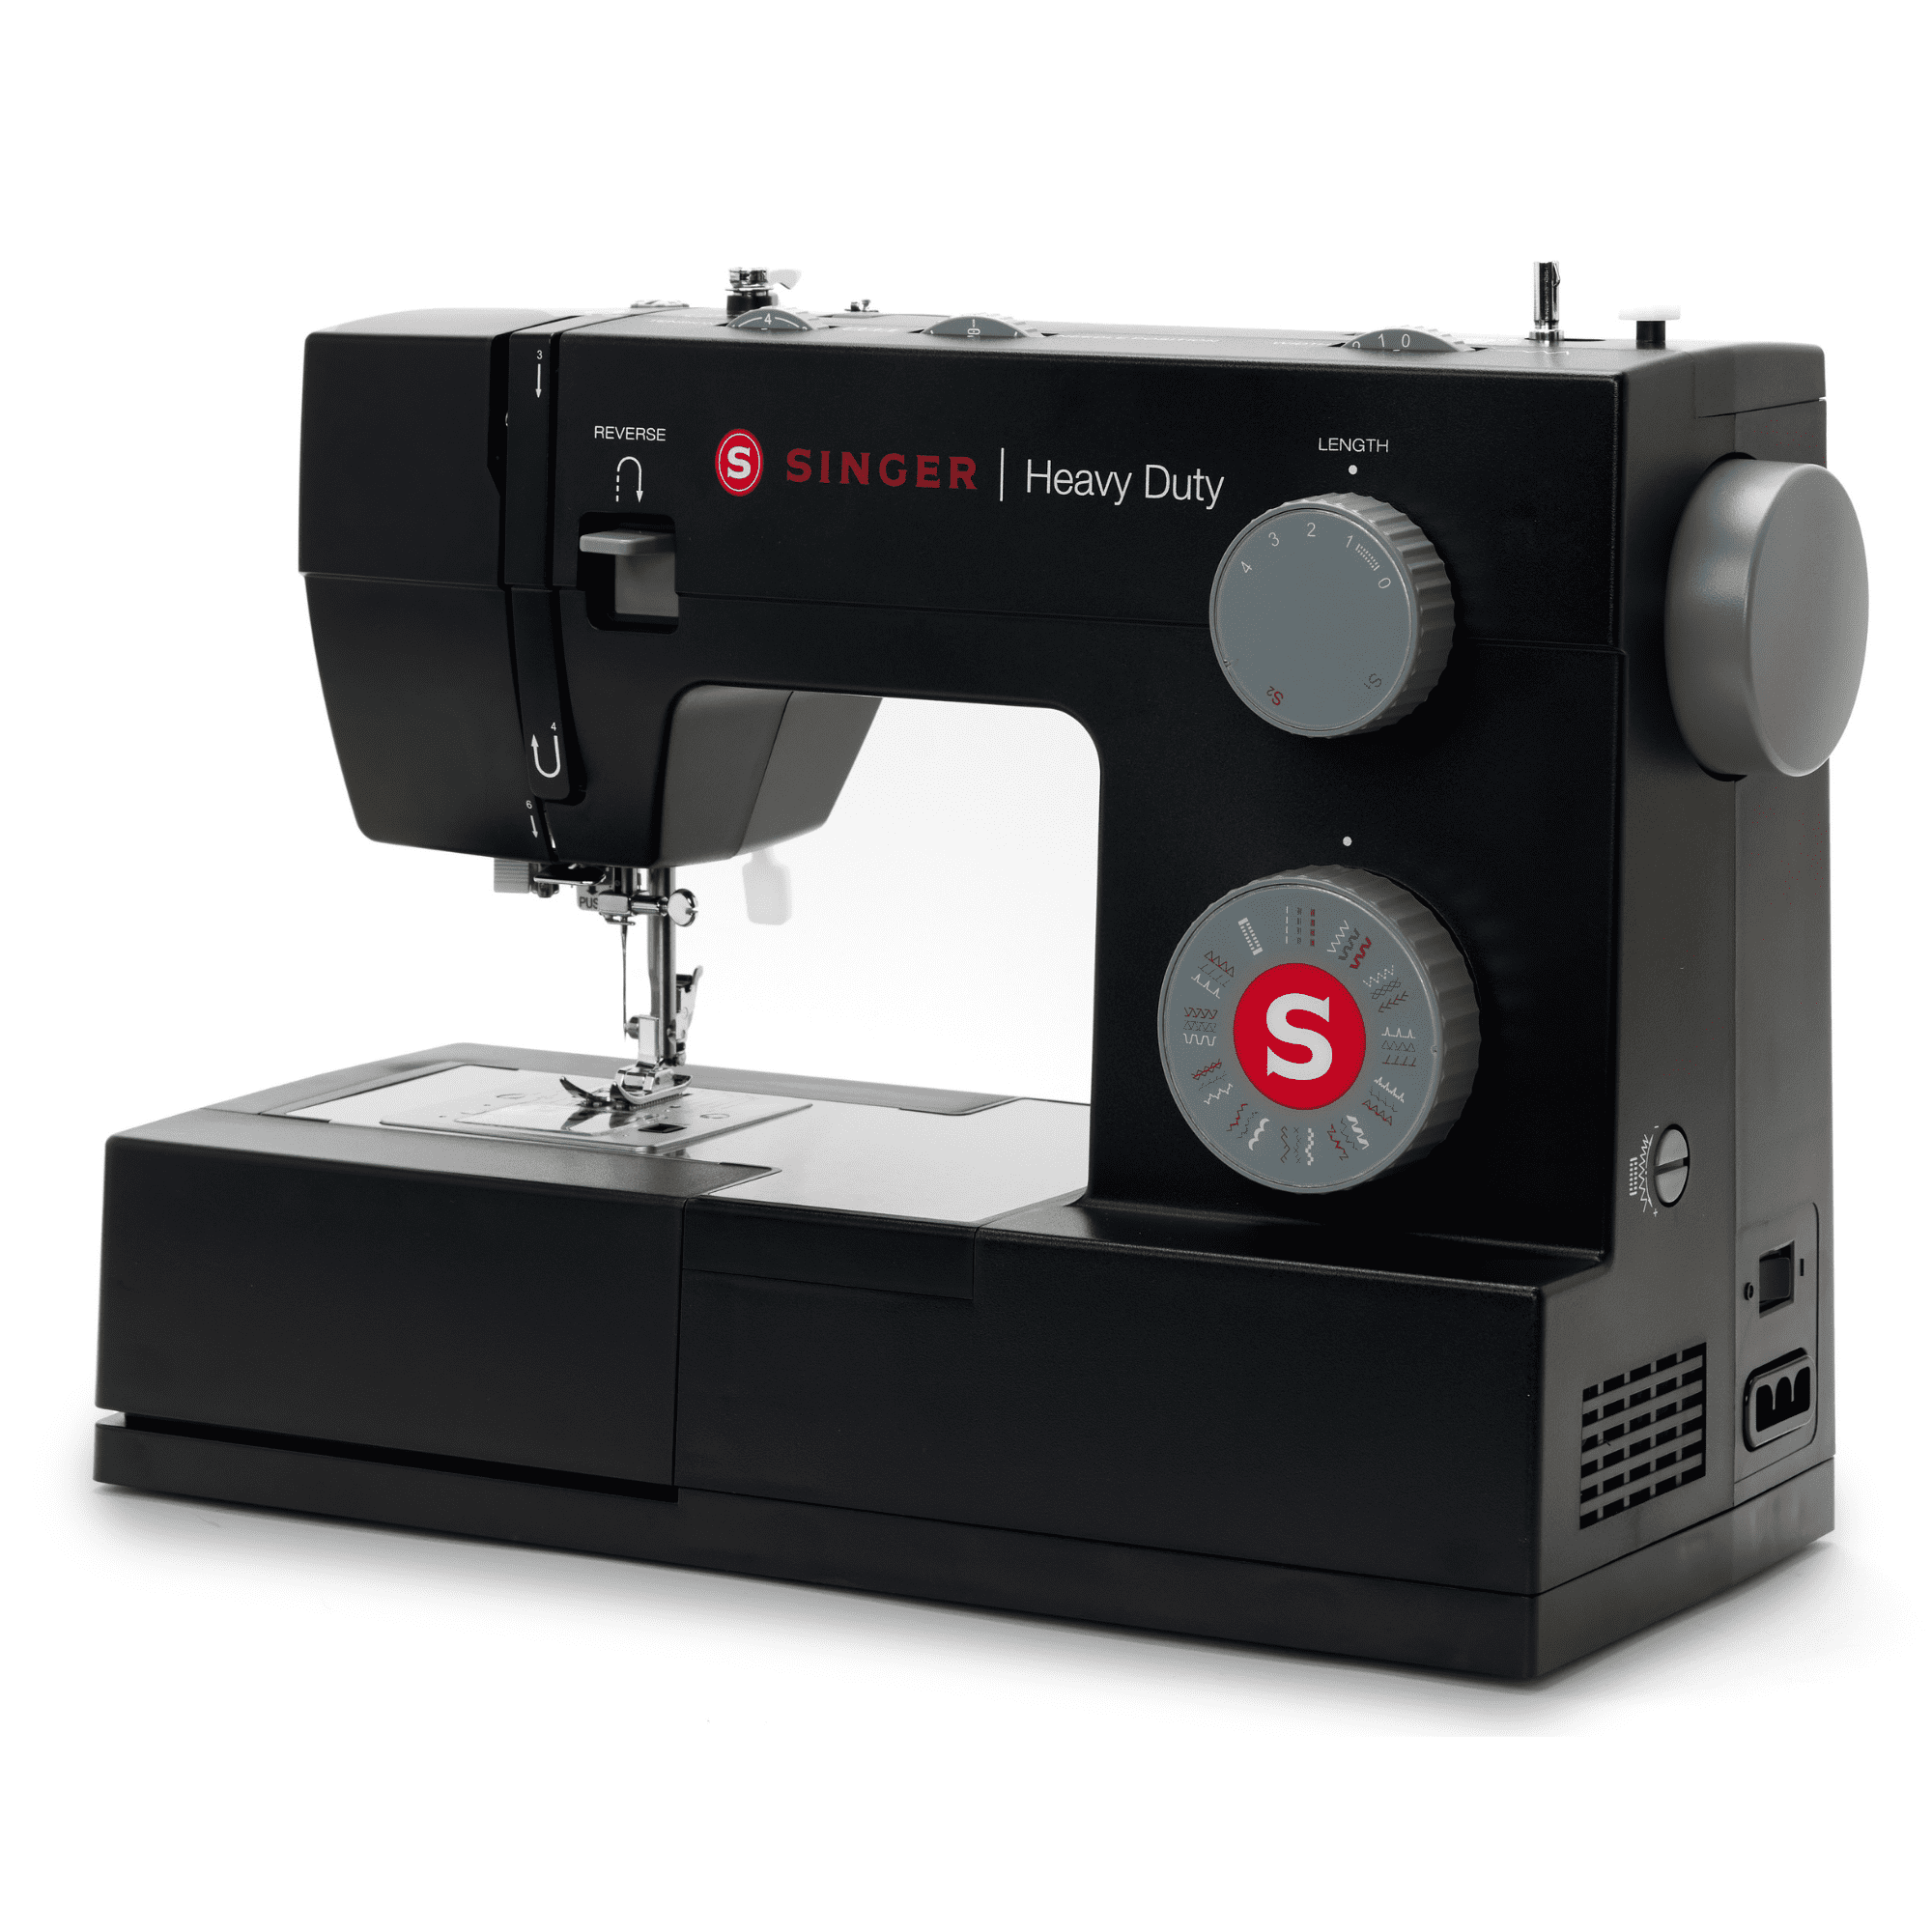 SINGER Heavy Duty 4432 Sewing Machine Review (Offer Price $209)